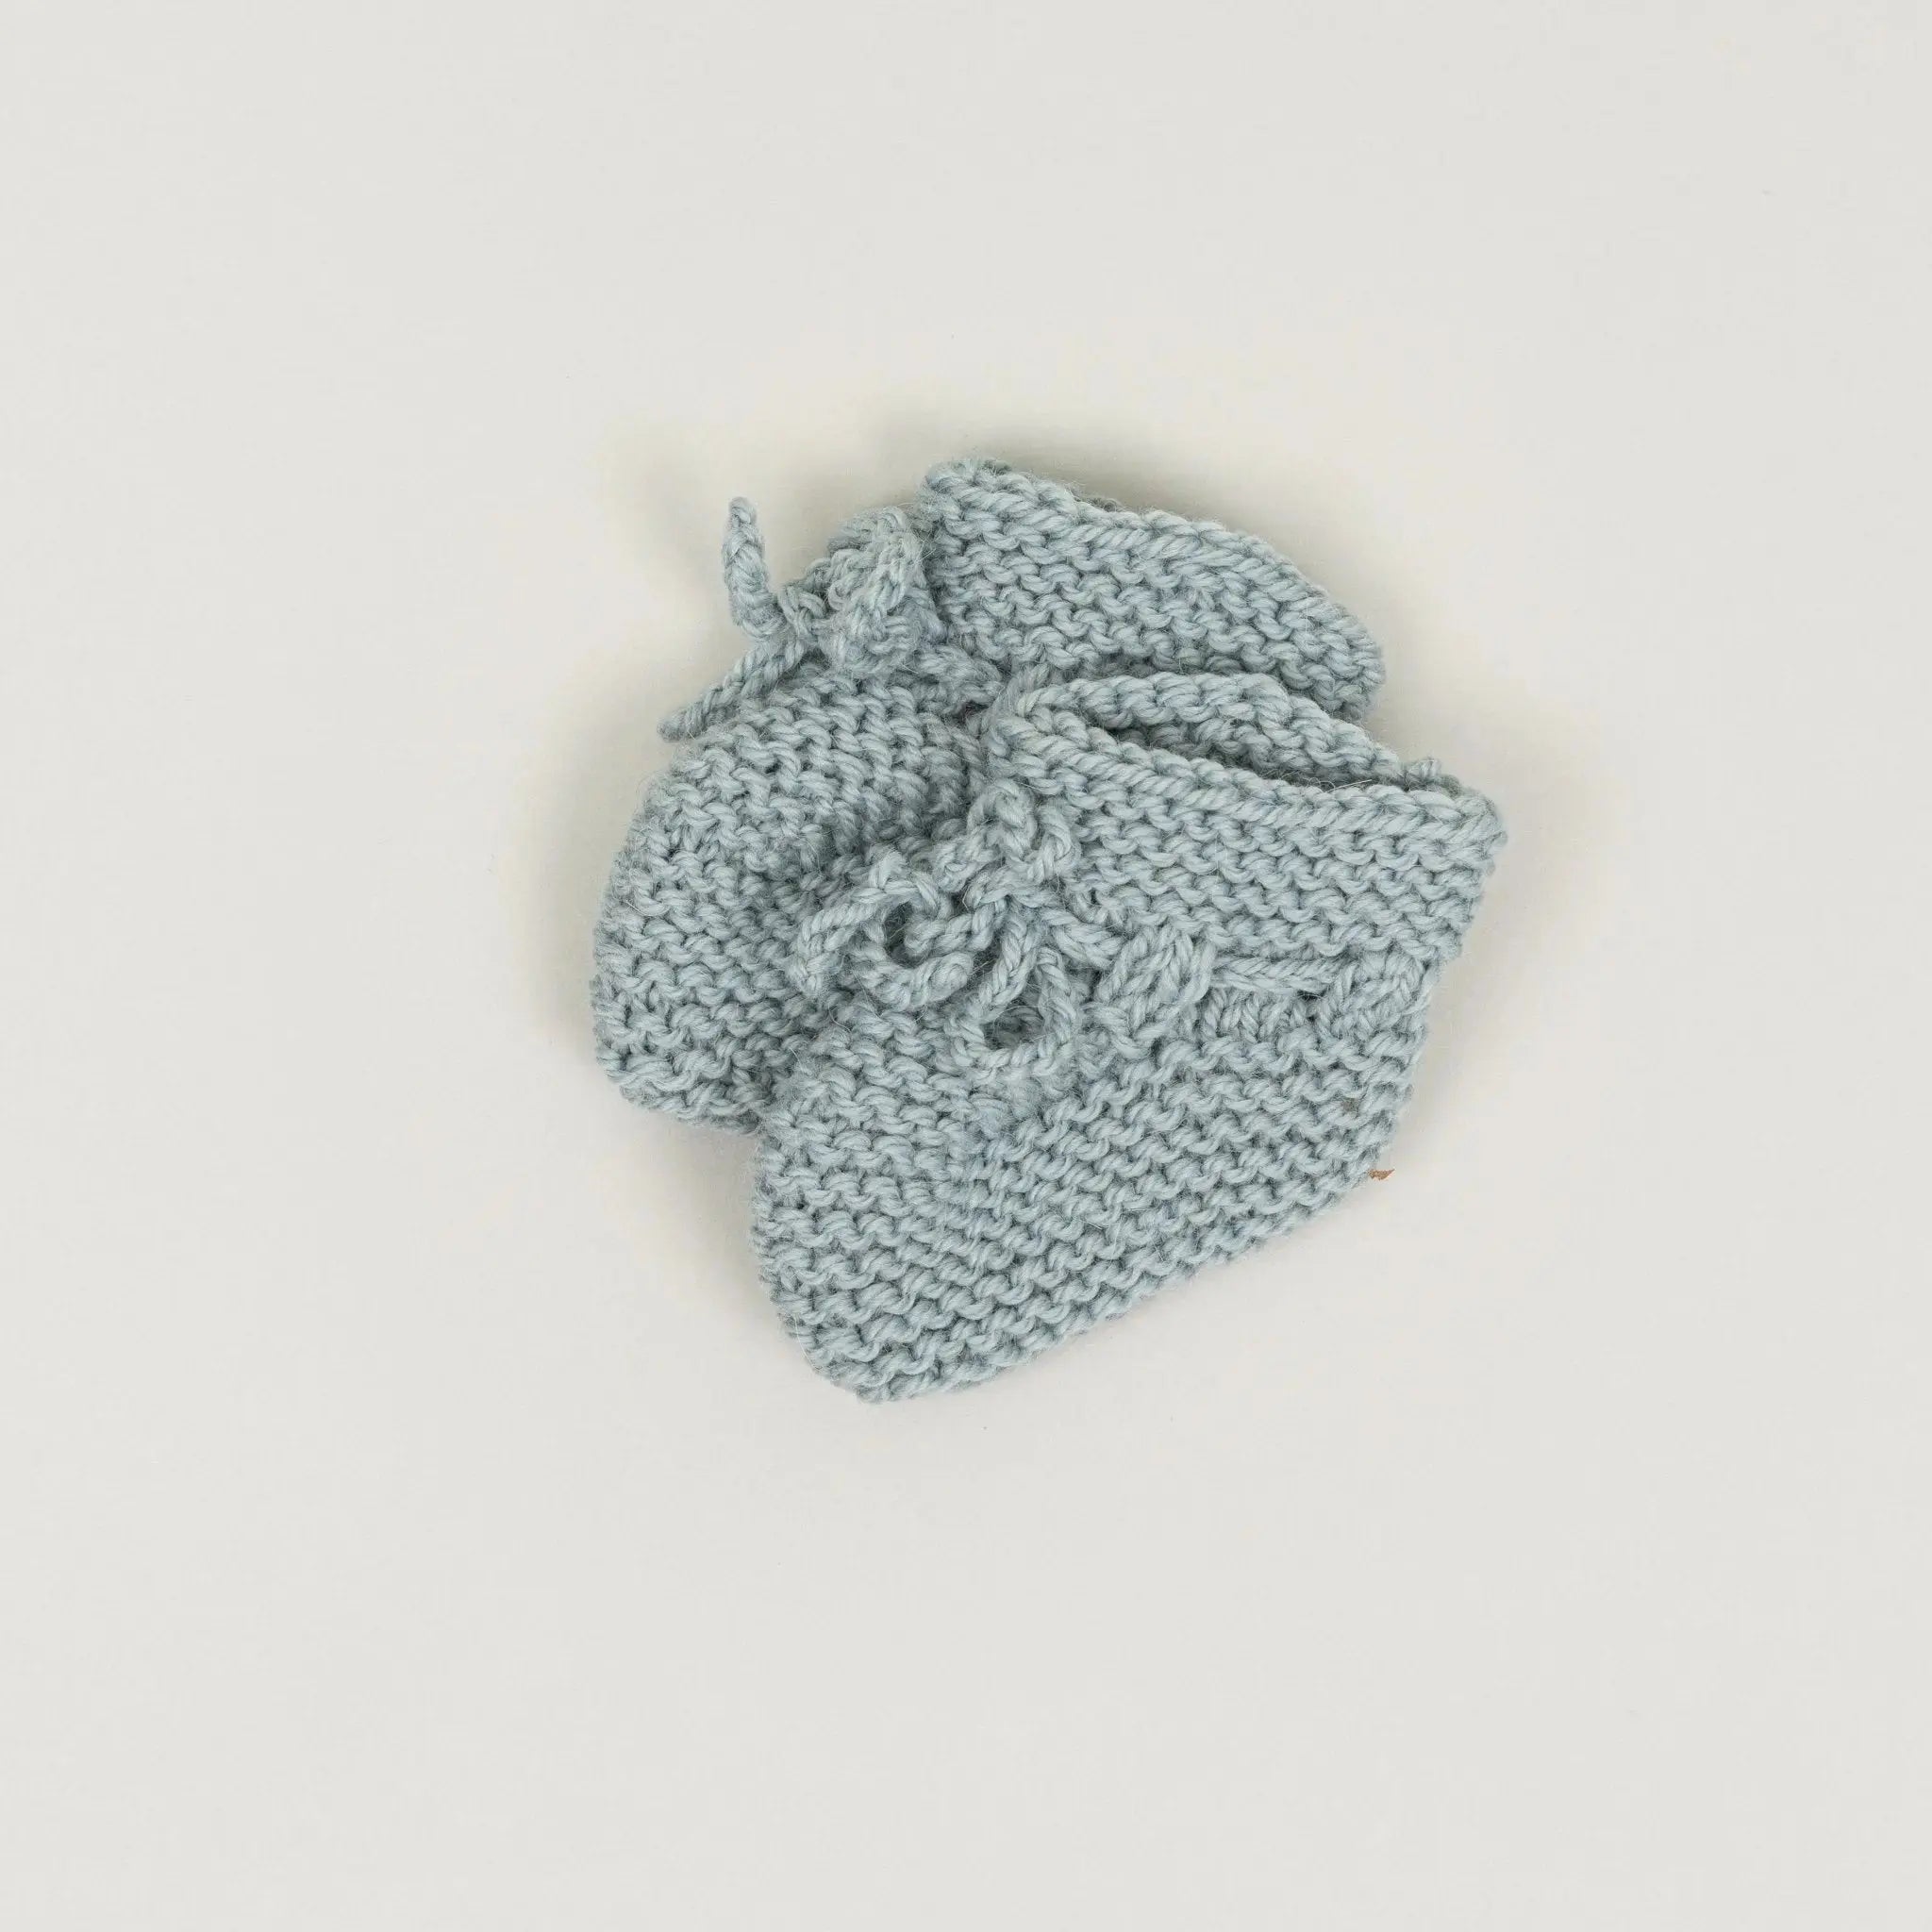 Hand-knitted baby shoes made of wool & alpaca